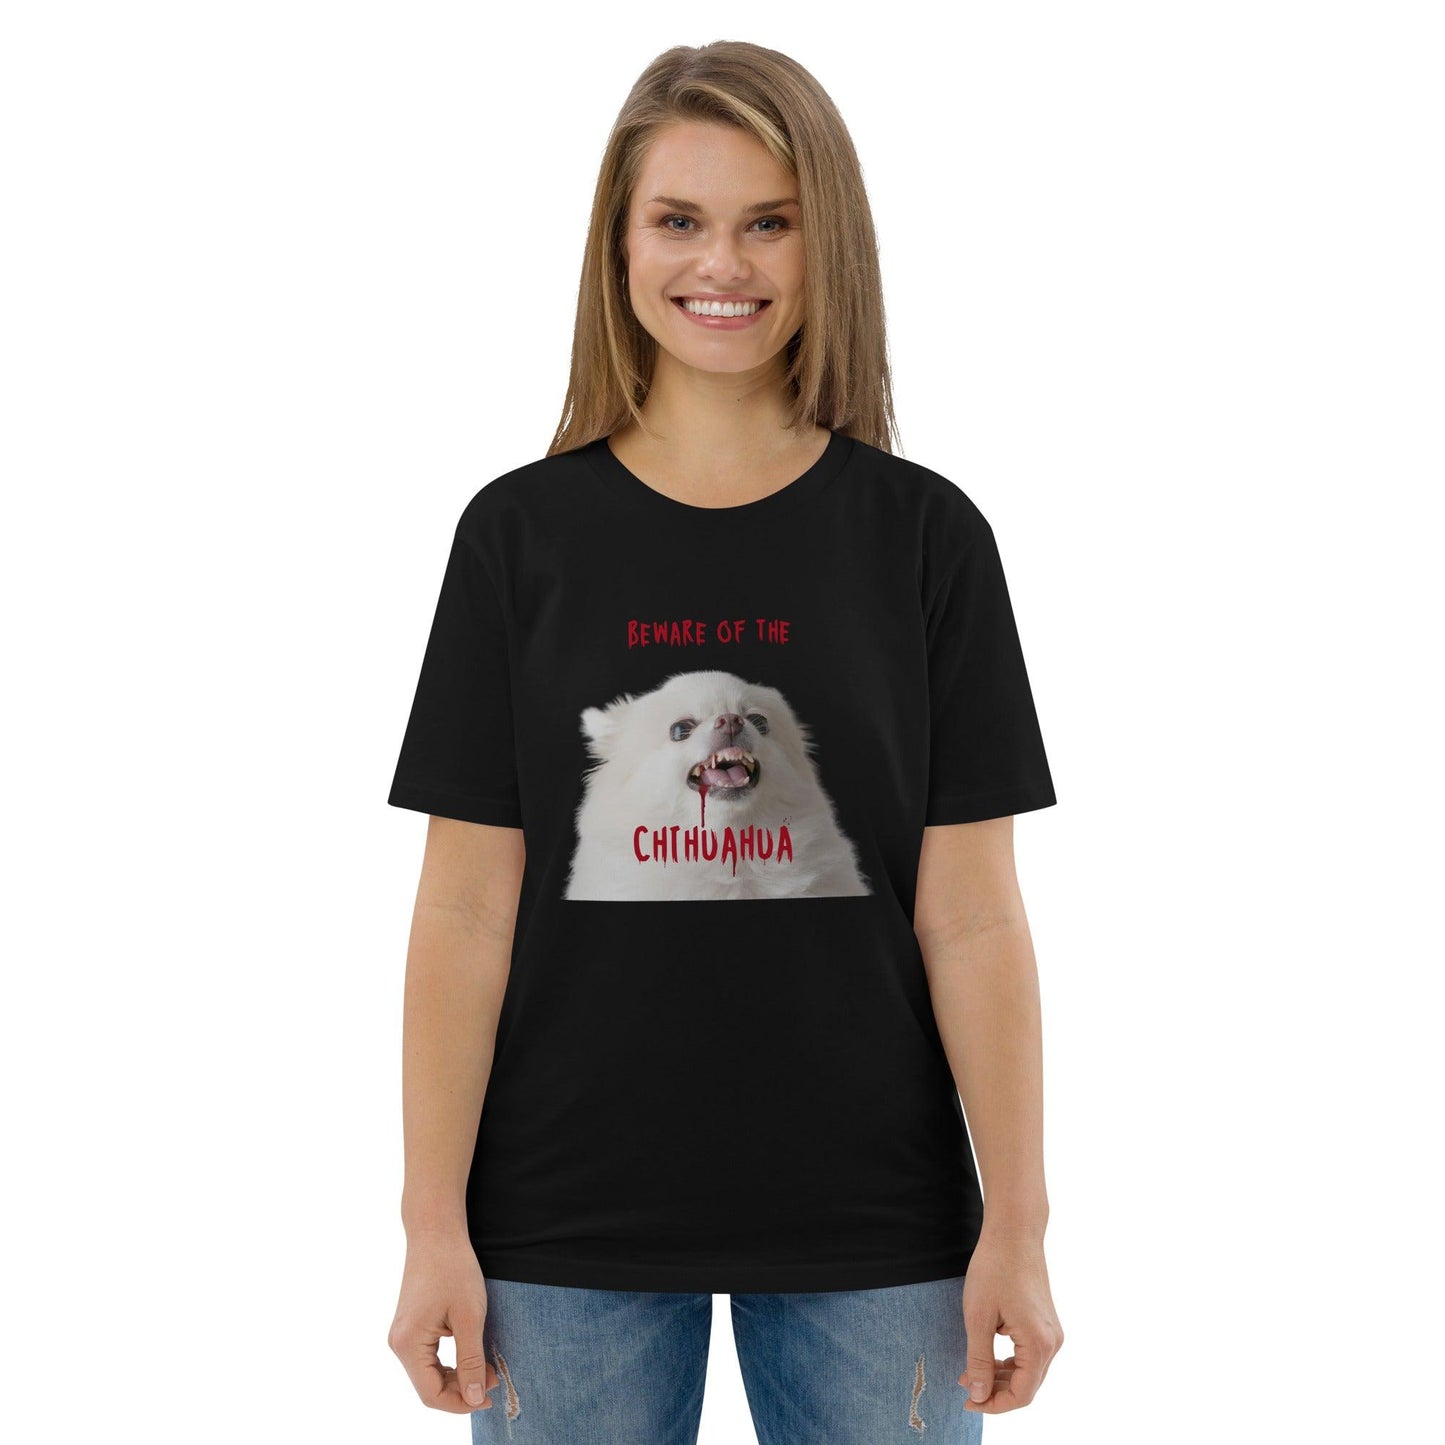 Beware of the Chihuahua - Zombie Chihuahua - organic cotton black Halloween t-shirt for men, women and teens. Design by Renate Kriegler for Chimigos.